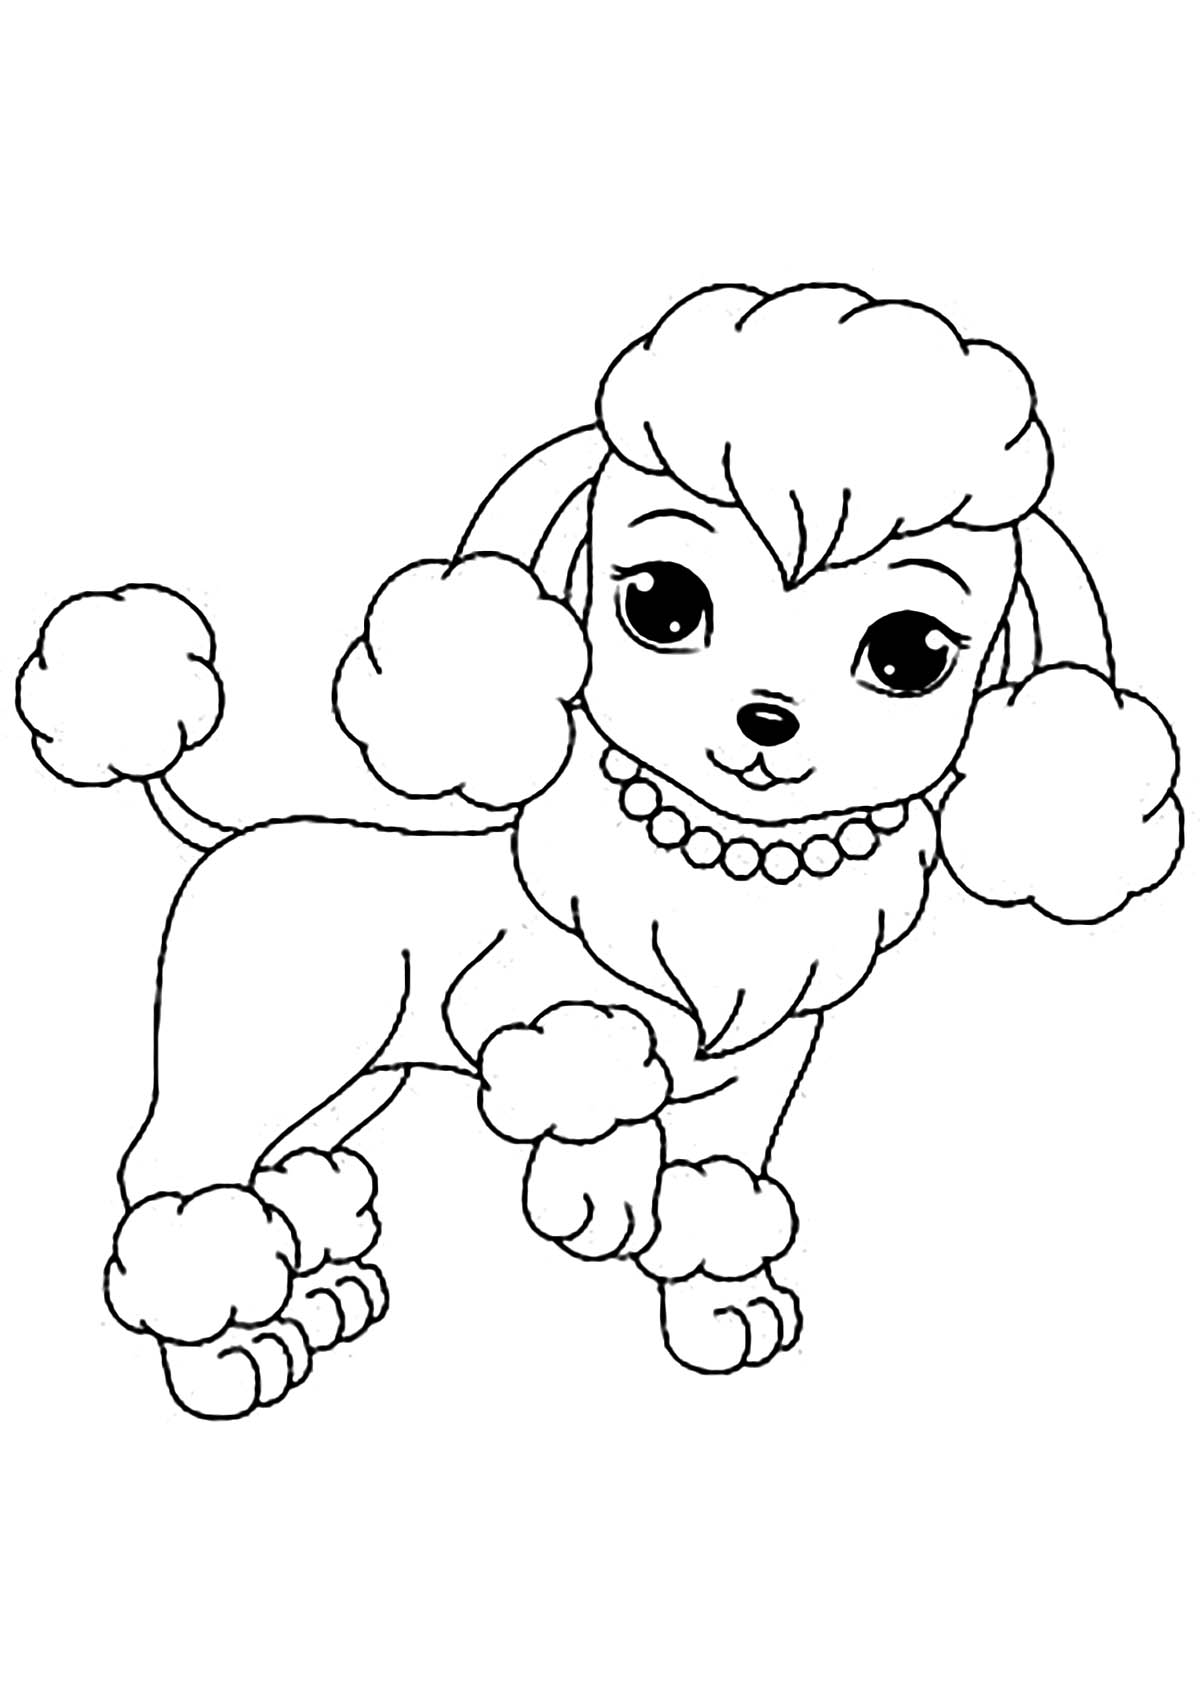 Coloring Pages Of Cute Puppies